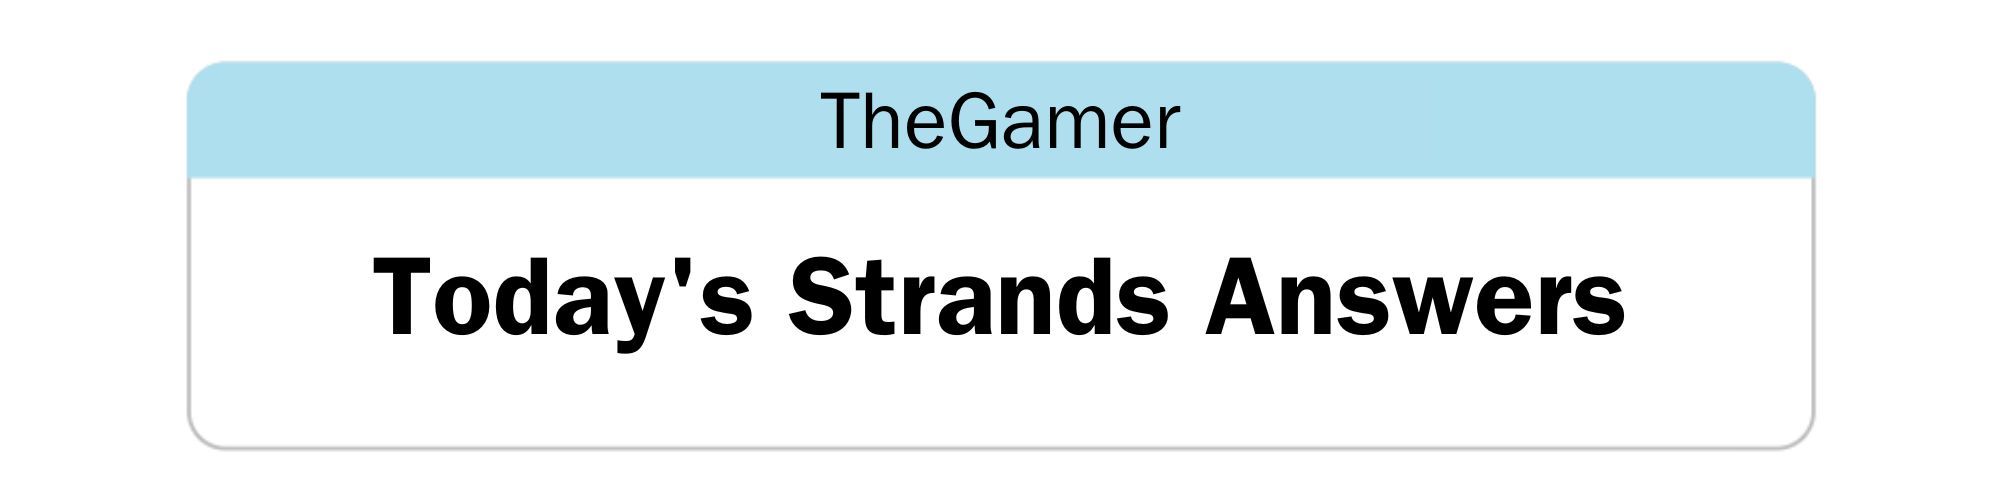 NYT Strands-inspired text box that reads: TheGamer - Today's Strands Answers